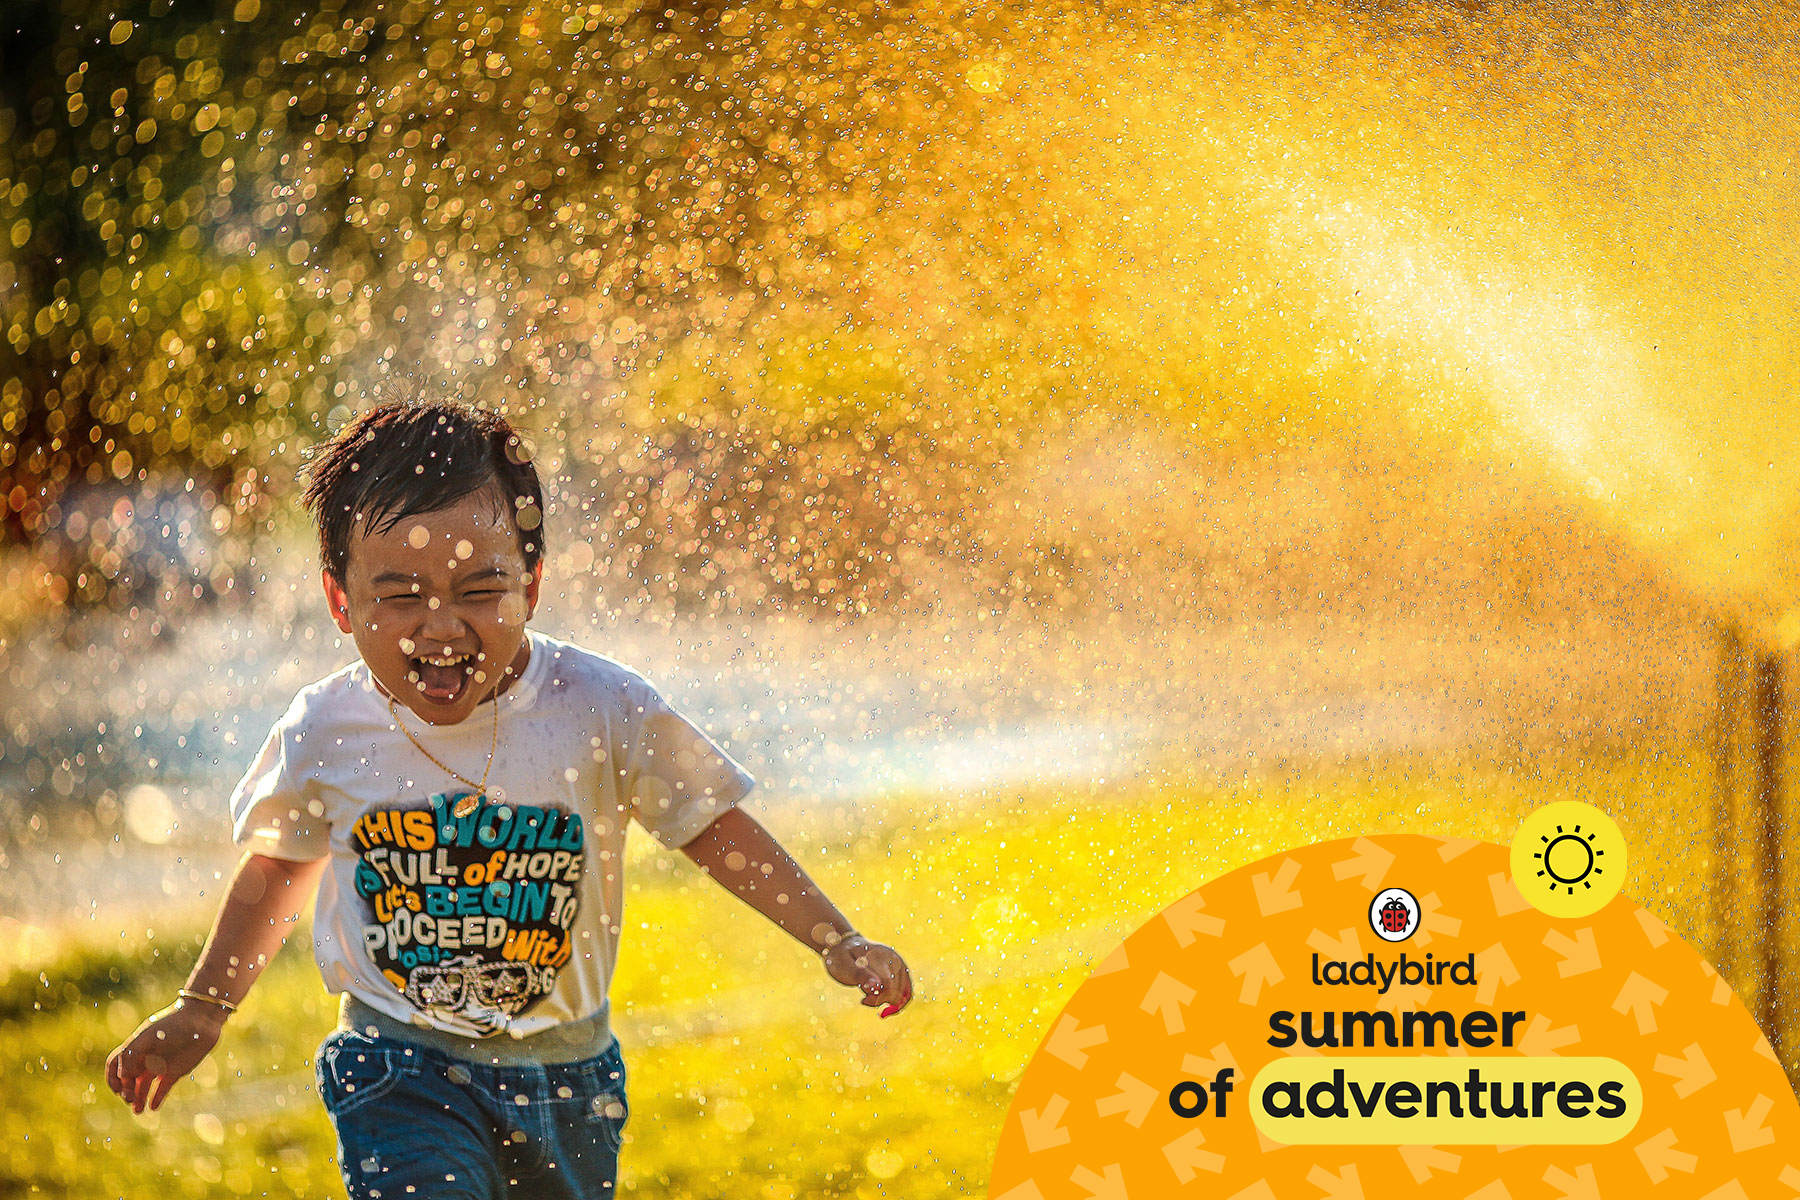 A photo that shows a little boy running away from sprinkler laughing